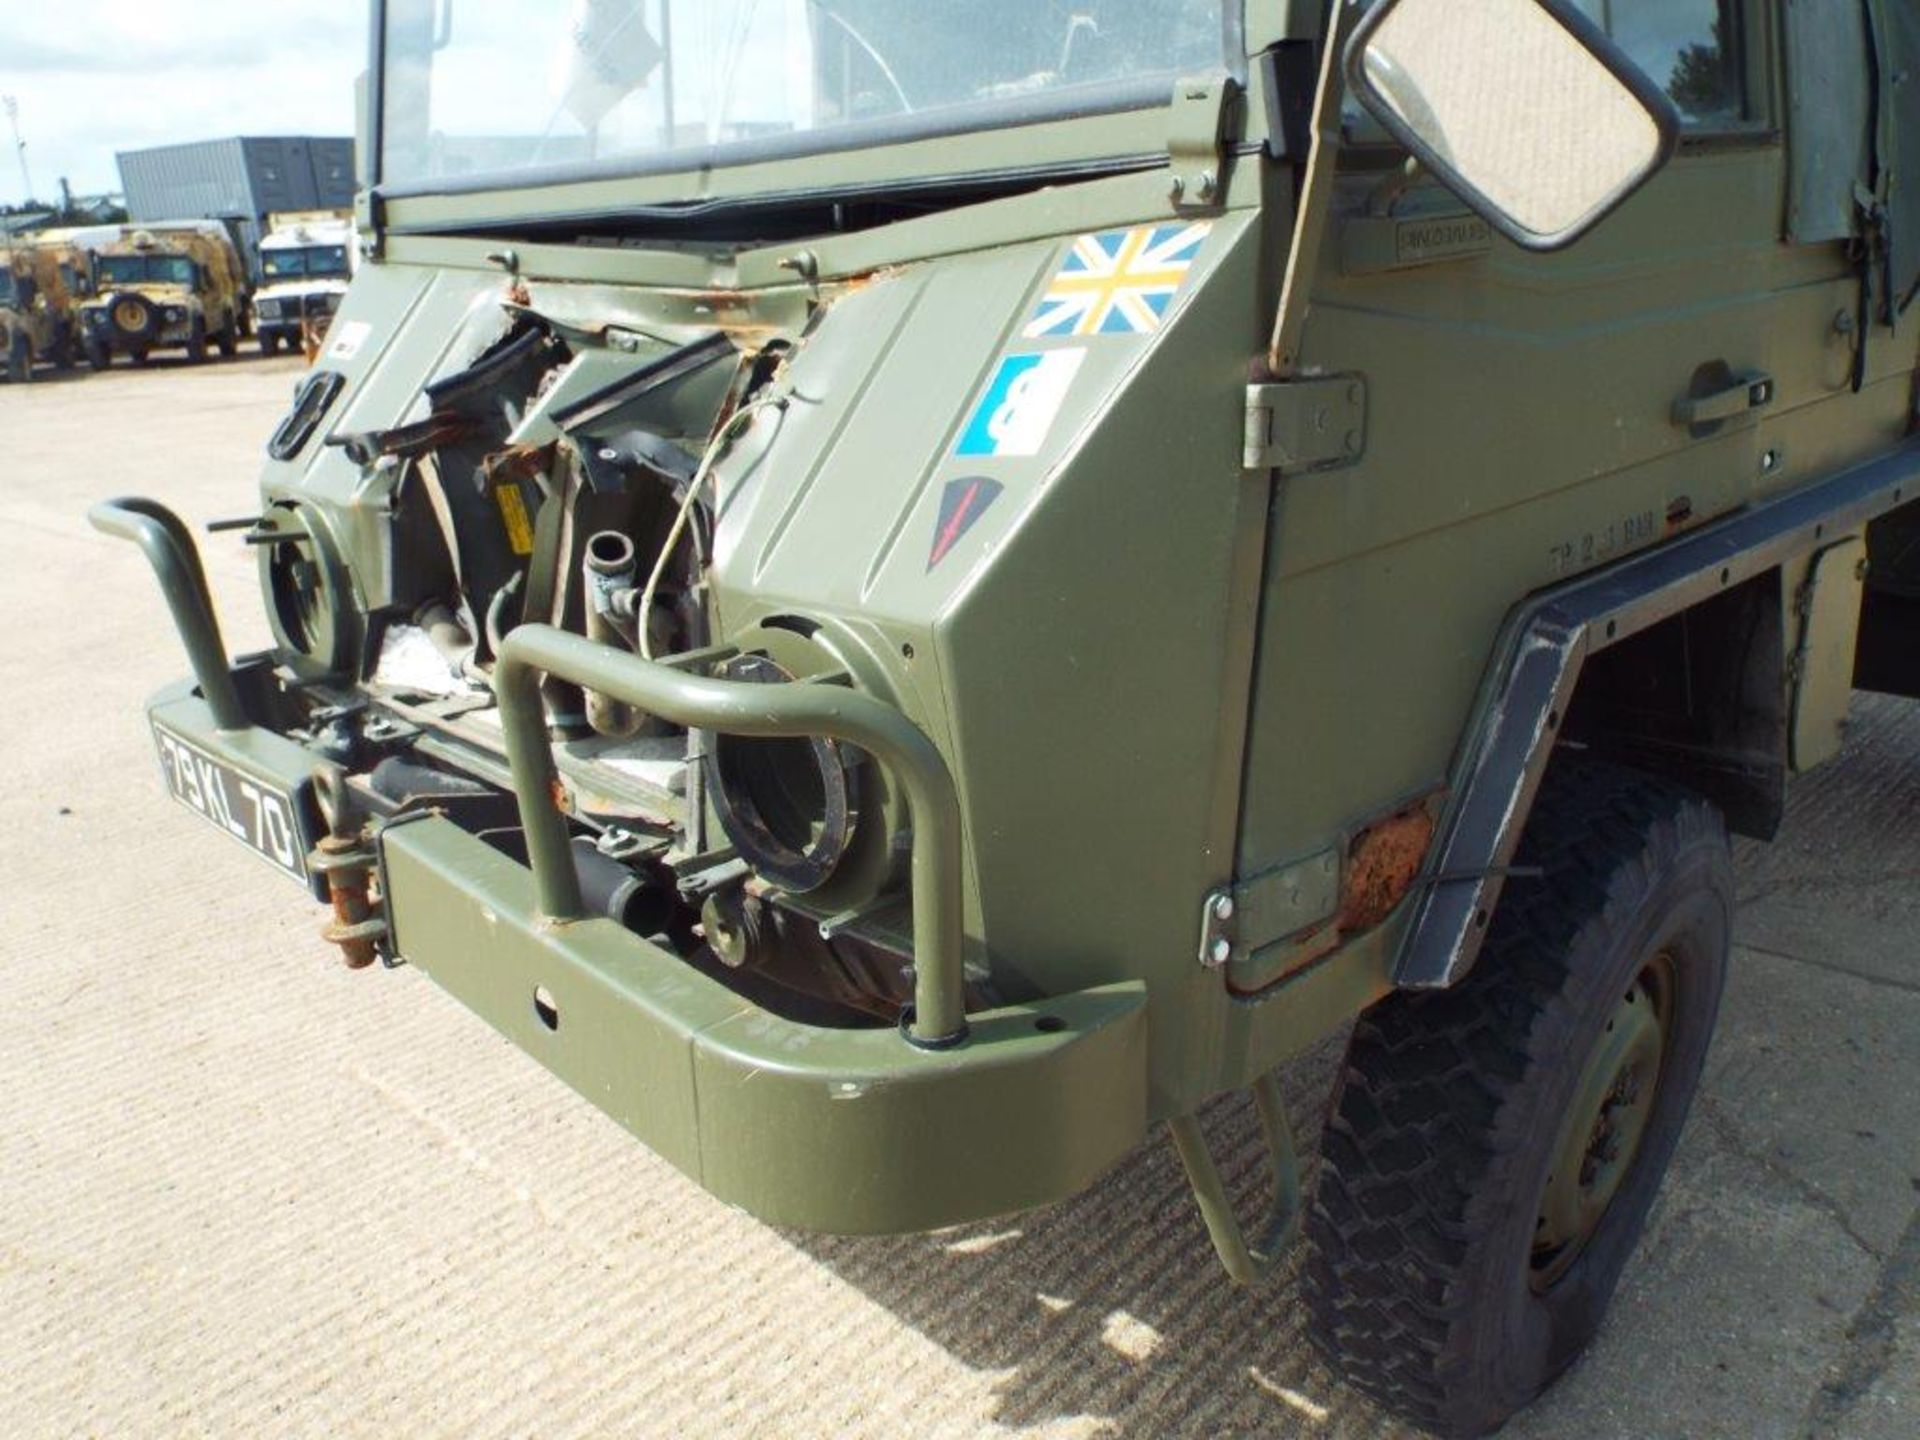 Military Specification Pinzgauer 4X4 Soft Top - Image 14 of 36